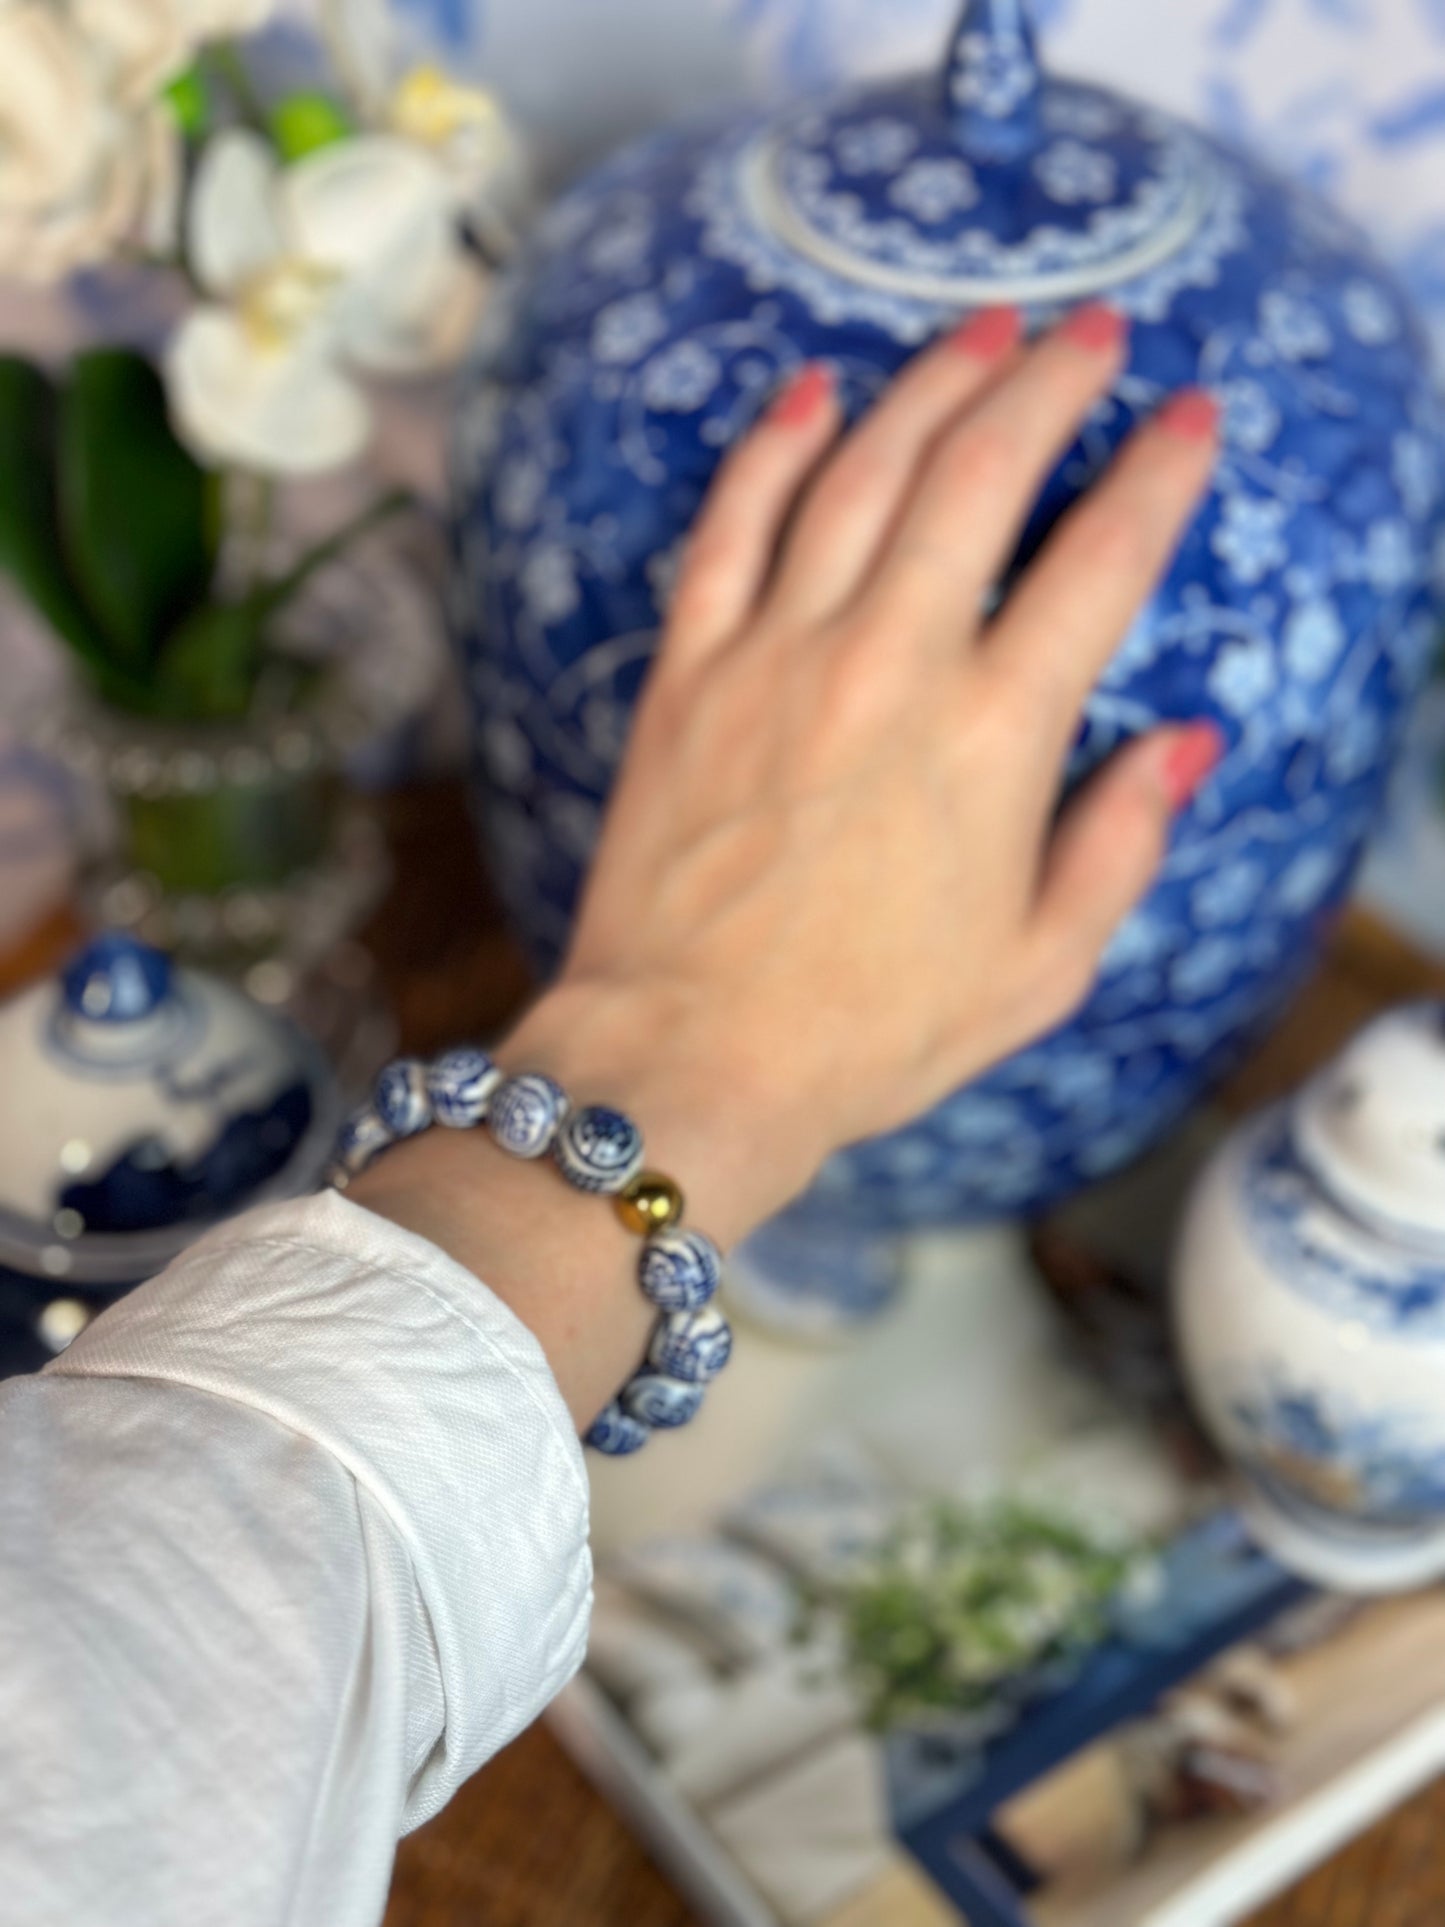 Blue & White Chinoiserie Porcelain Stretch Bracelet - Made in U.S.A